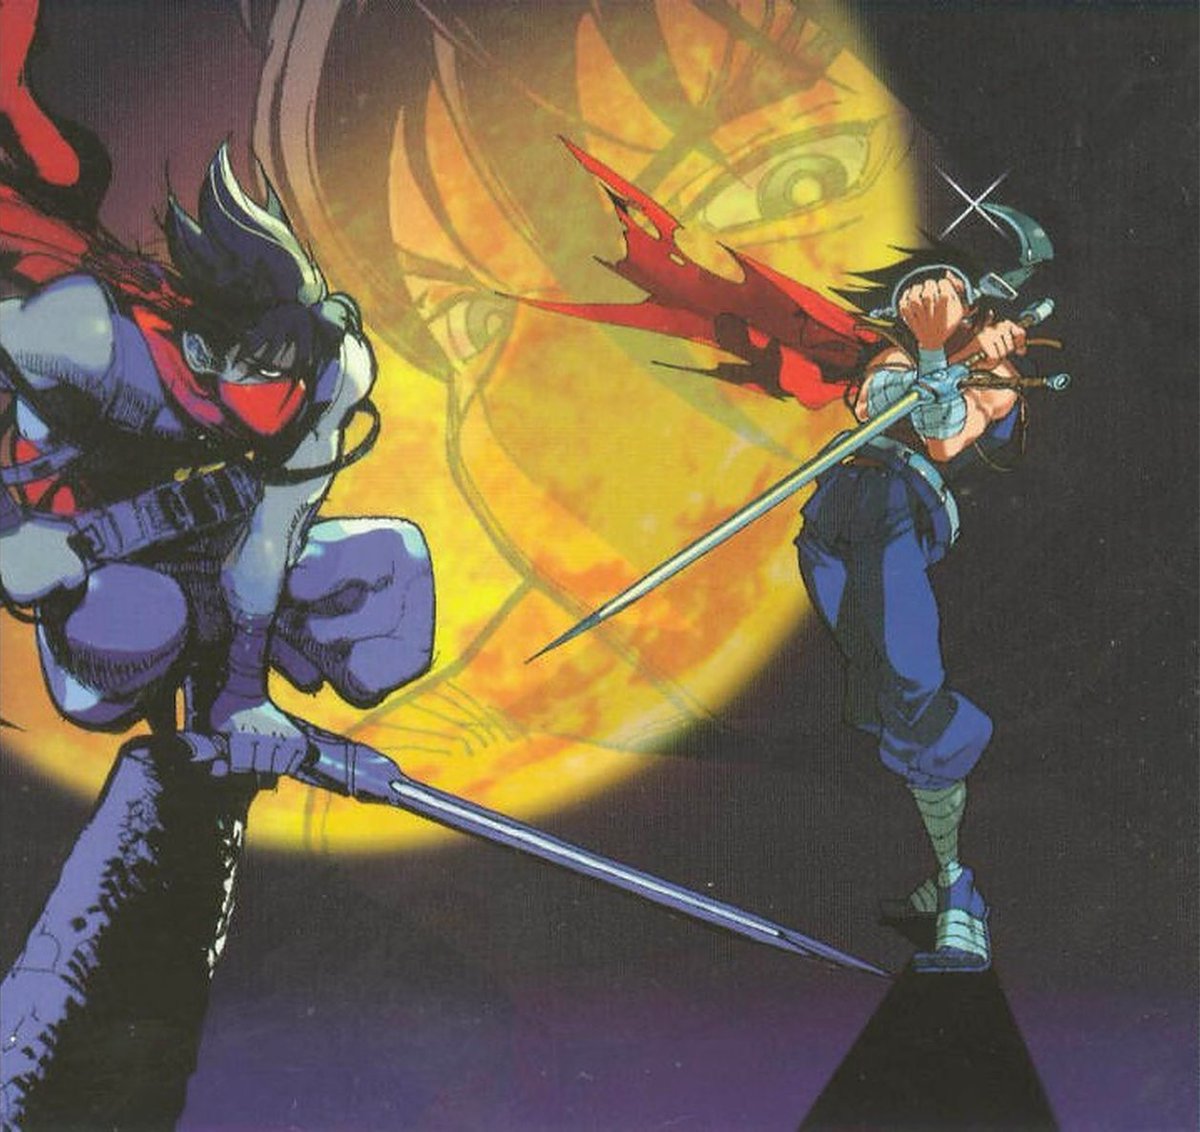 RT @nbajambook: 2000 interior cover art for Strider 2 on the PlayStation. https://t.co/aevedXpXx8